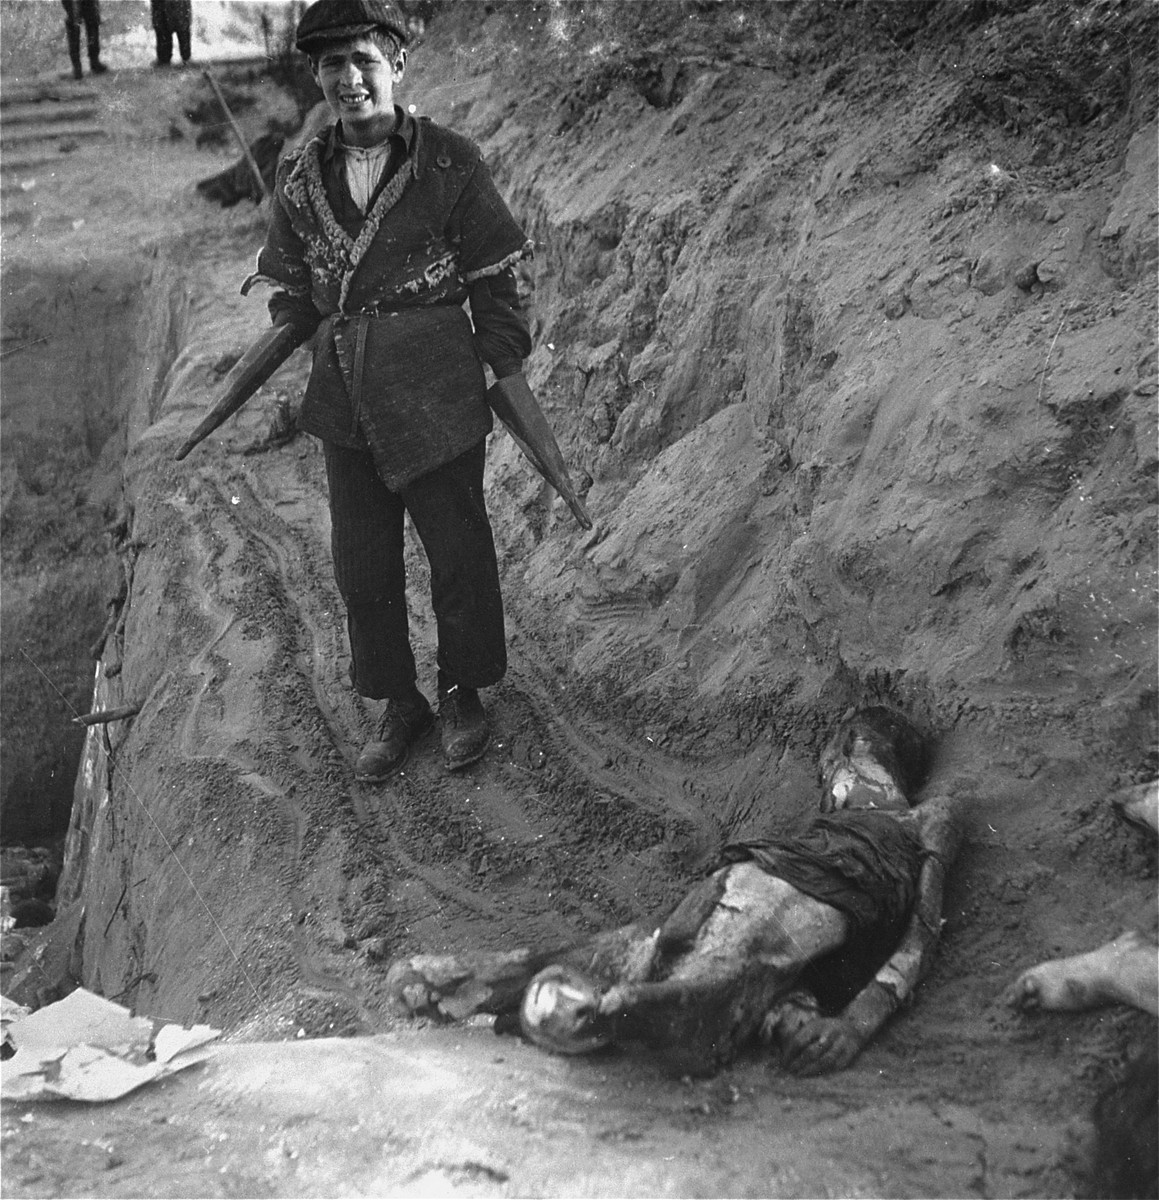 A boy at work burying bodies in the Warsaw ghetto cemetery pauses for Heinrich Joest to photograph him.  

Joest's caption reads: "Himself still half a child, this youth belonged to the Jewish corpse-bearers: he showed me how he took hold of the corpses with his remarkable gloves, pulled them to the edge of the grave and let them slide down."